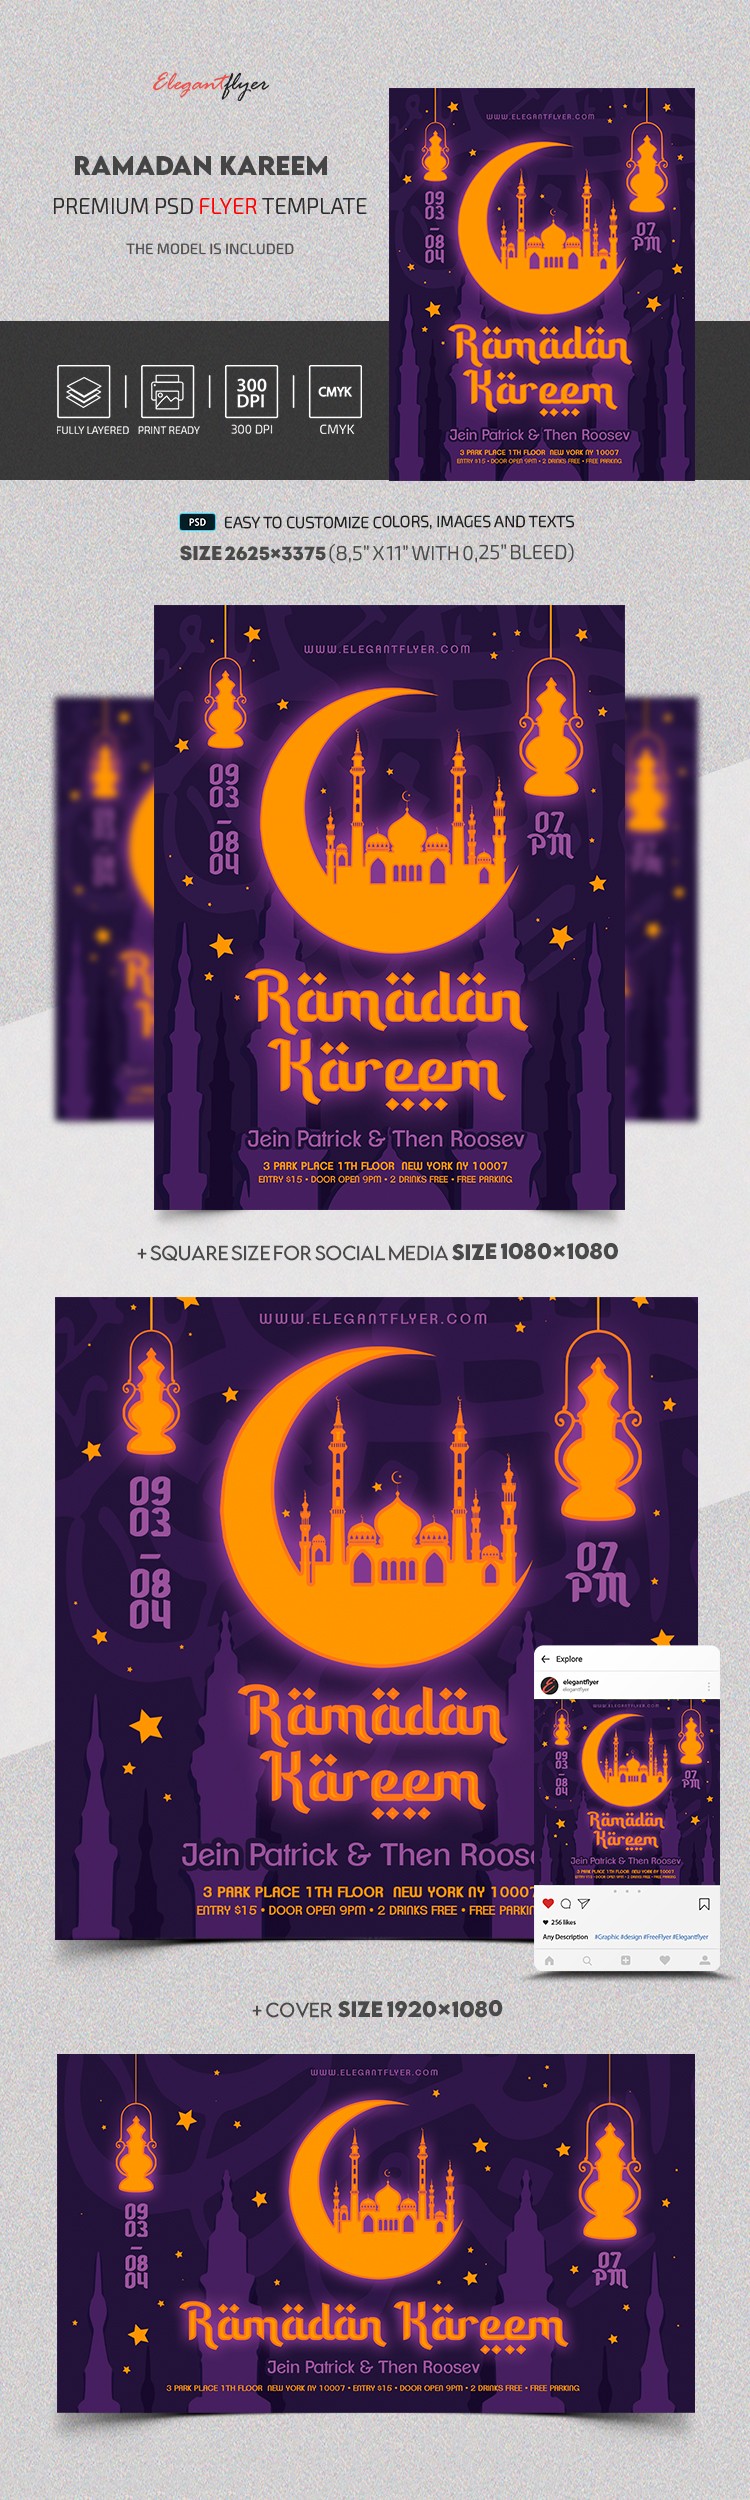 Ramadan Kareem translates to "Wesołego Ramadanu" in Polish. However, since there are no links or HTML tags in the provided text, the translated result would simply be "Wesołego Ramadanu". by ElegantFlyer